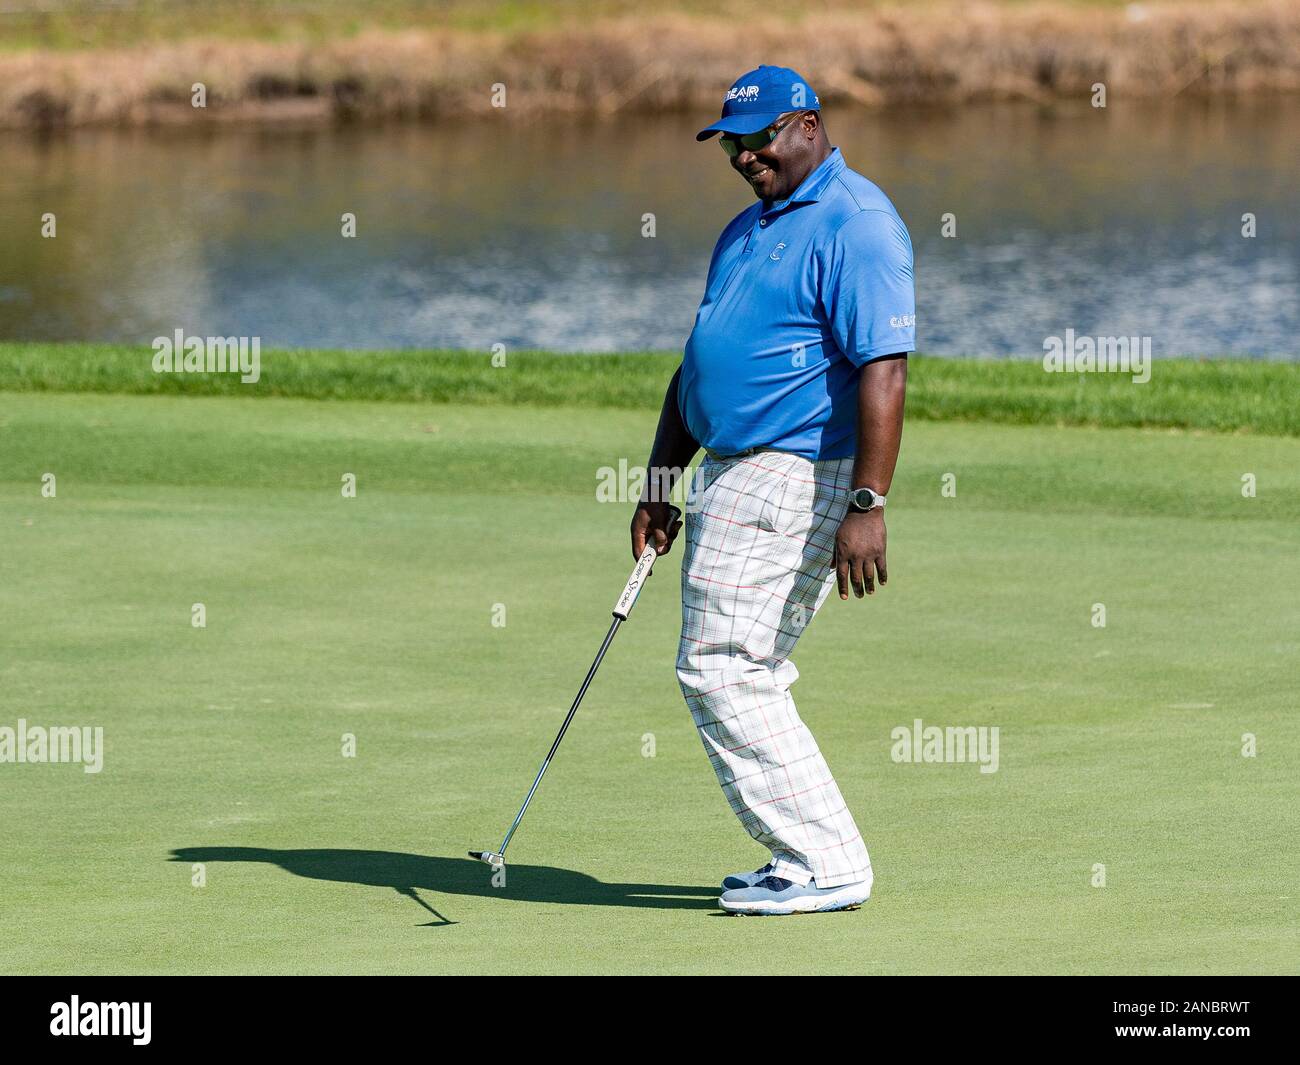 Lake Buena Vista, FL, USA. 16th Jan, 2020. Former NFL player Sterling Sharpe during 1st round of Diamond Resorts Tournament of Champions Presented by Insurance Office of America held at Tranquilo Golf Course at Four Seasons Golf and Sports Club Orlando in Lake Buena Vista, Fla. Romeo T Guzman/CSM/Alamy Live News Stock Photo